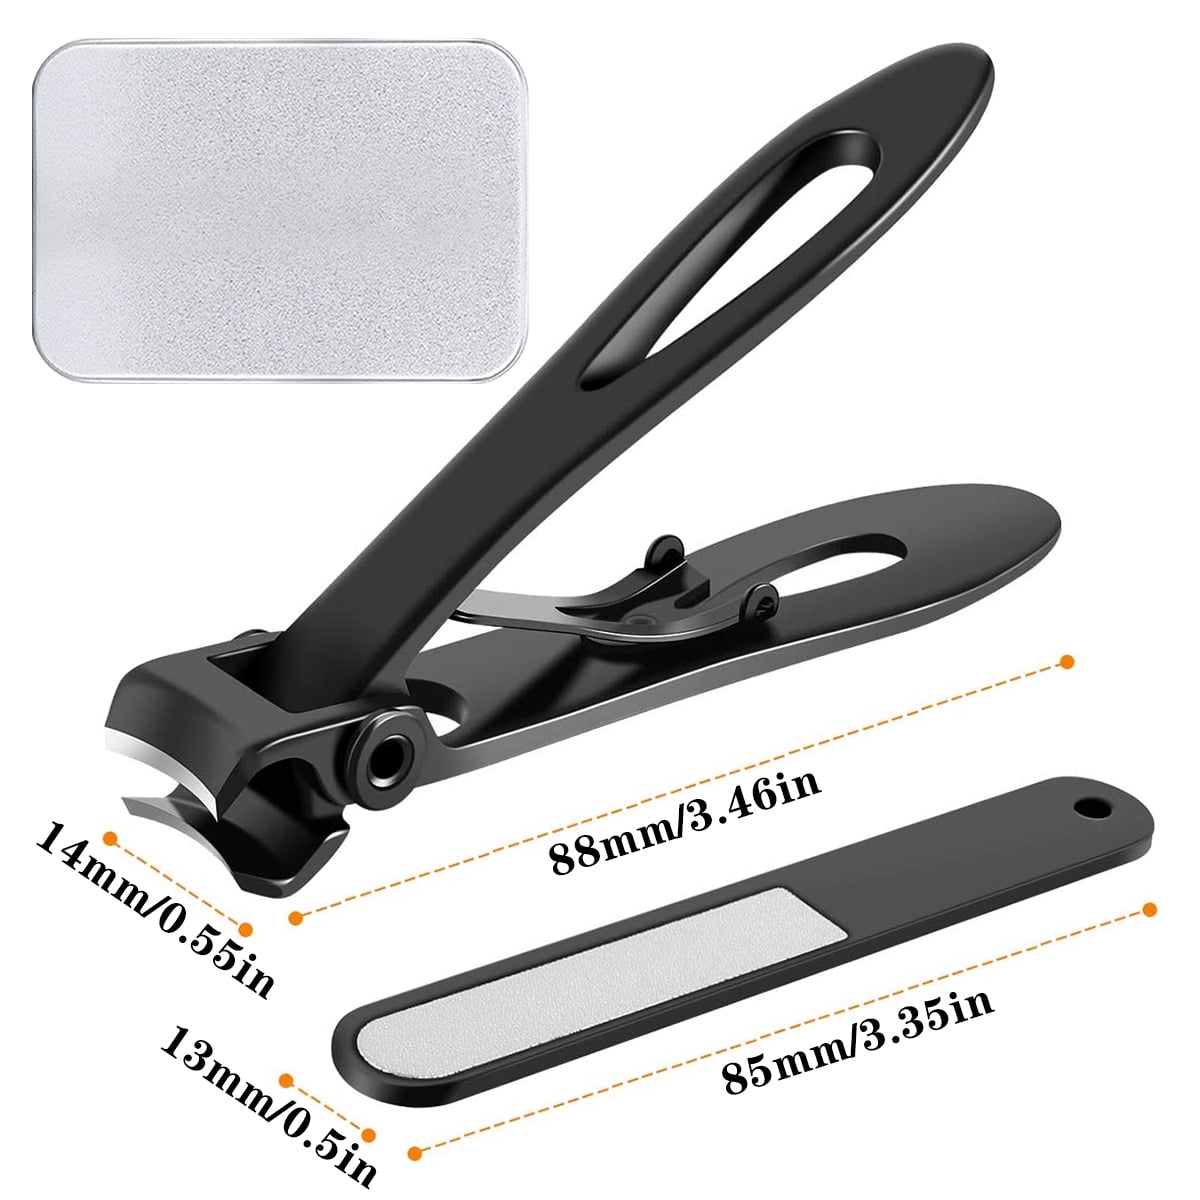  Nail Clippers for Thick Nails – KLIPP 15 mm Wide Jaw